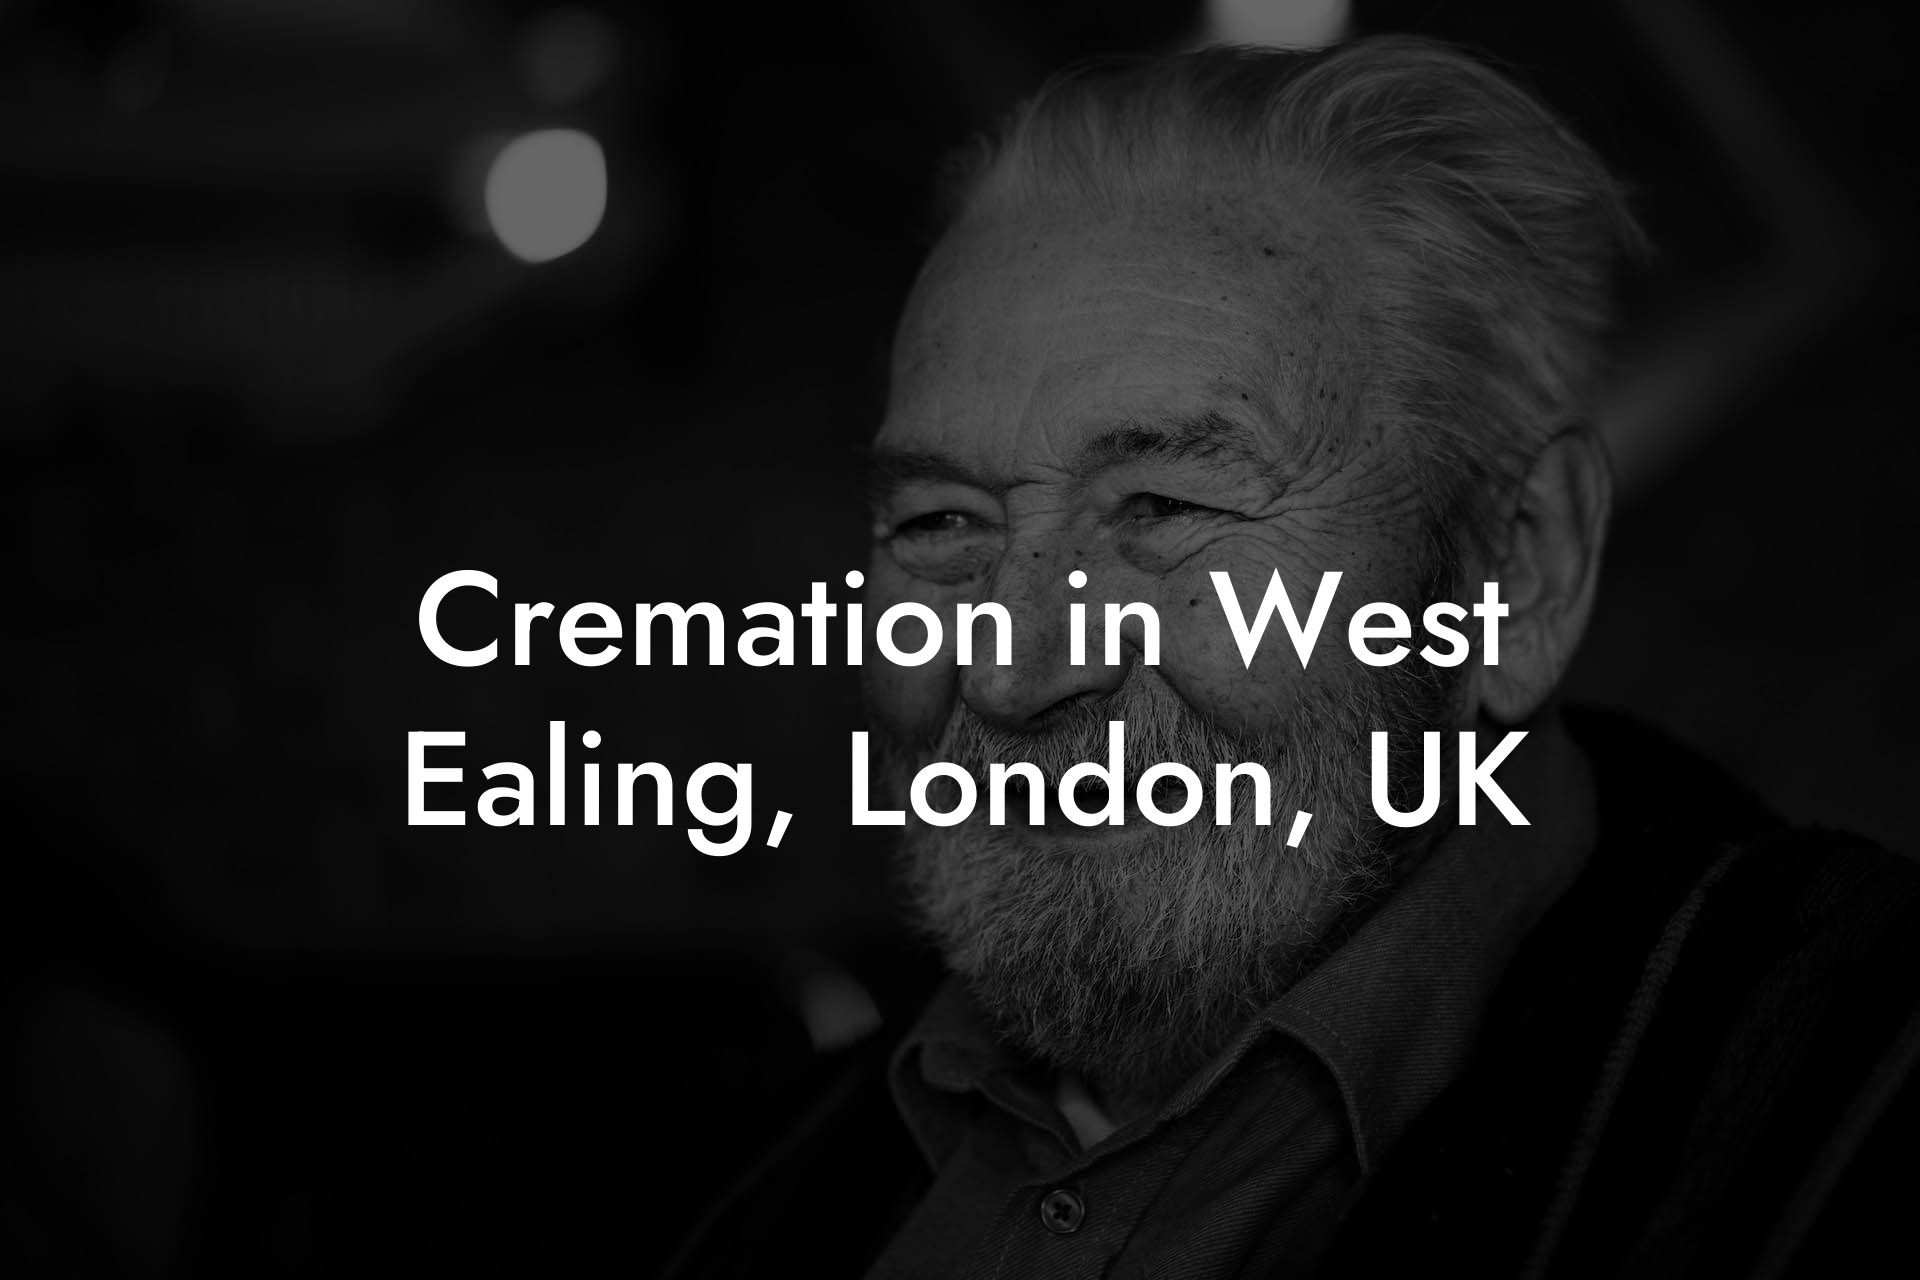 Cremation in West Ealing, London, UK